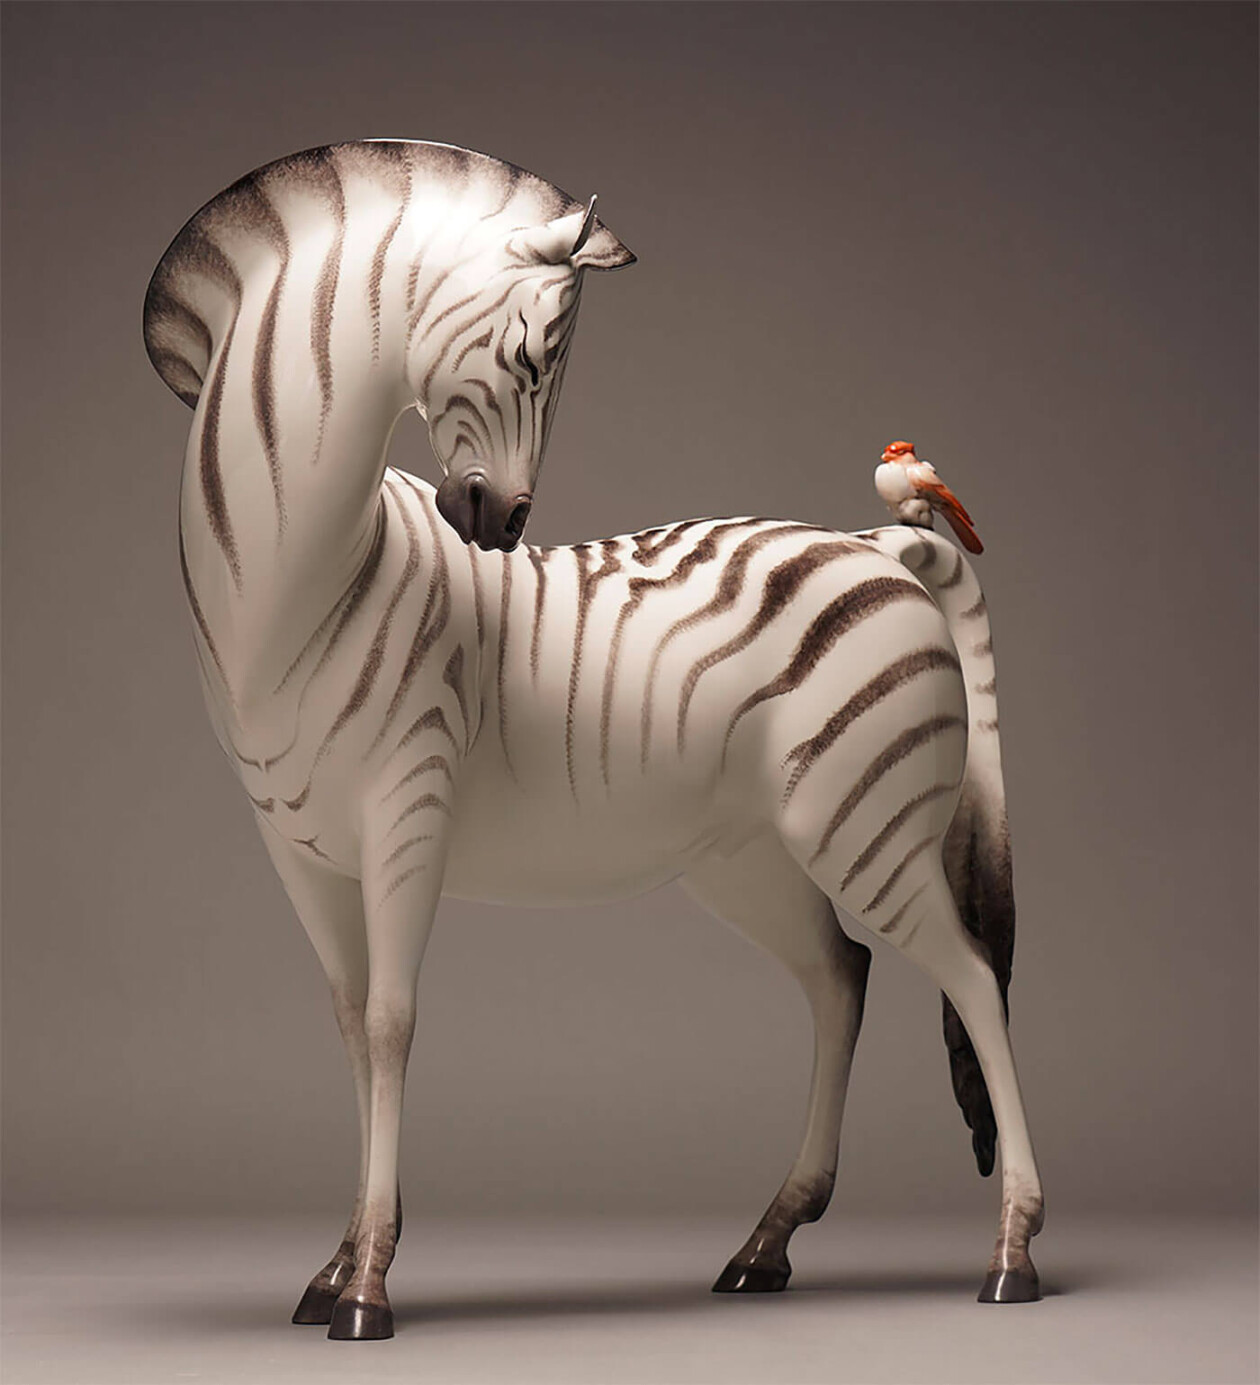 Formidable Animal Sculptures By Zhao Kai (21)